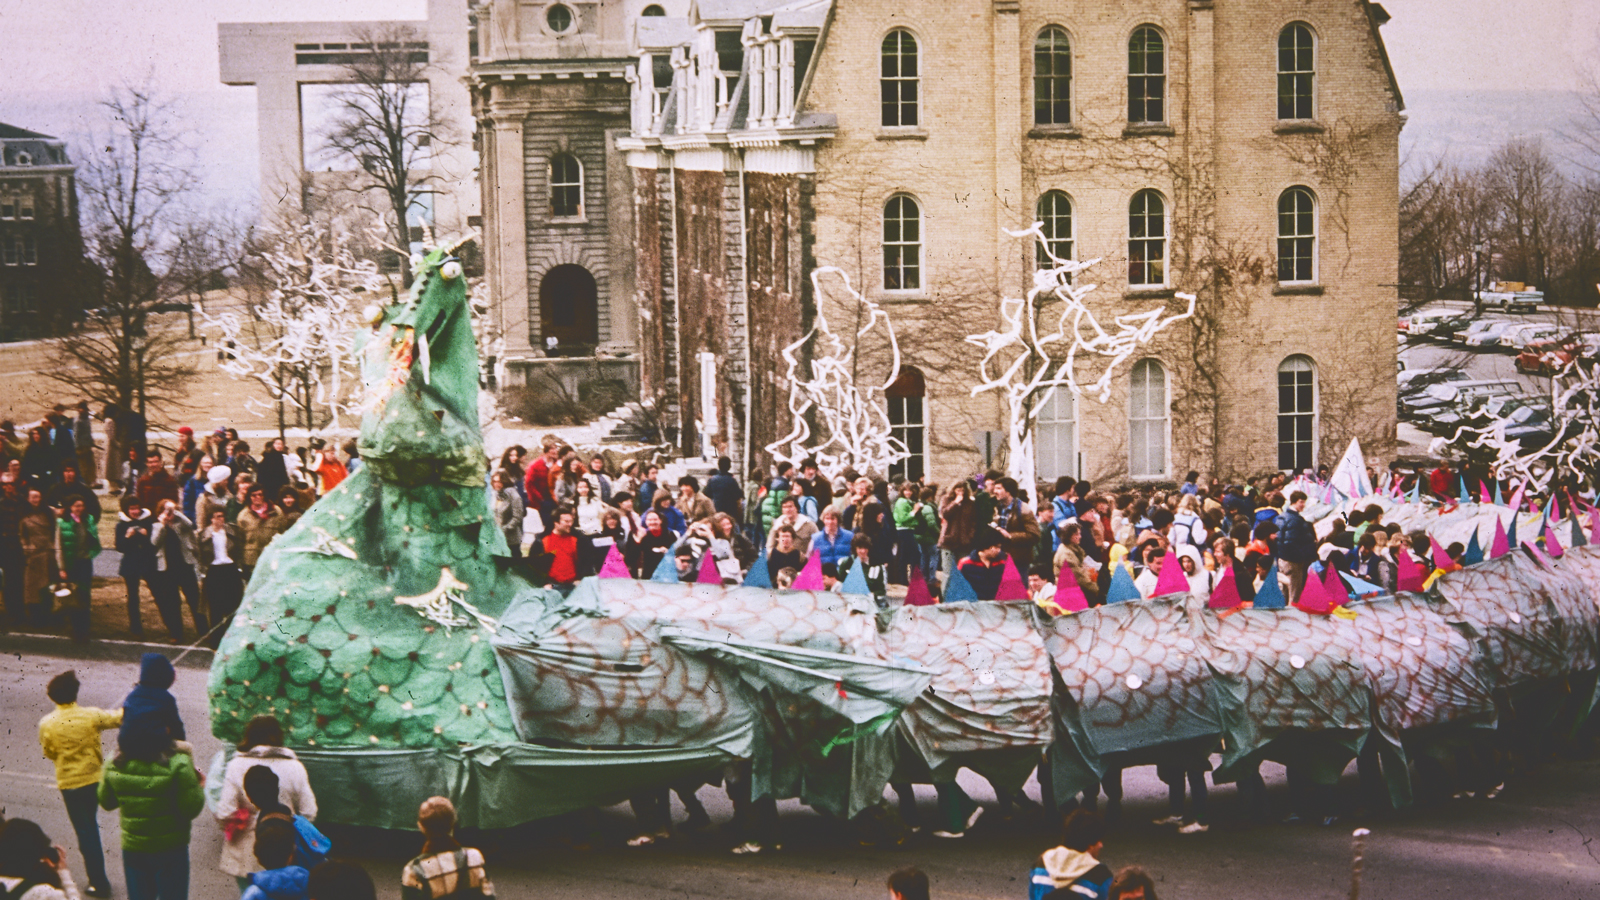 The dragon begins the parade route alongside Rand Hall in 1981